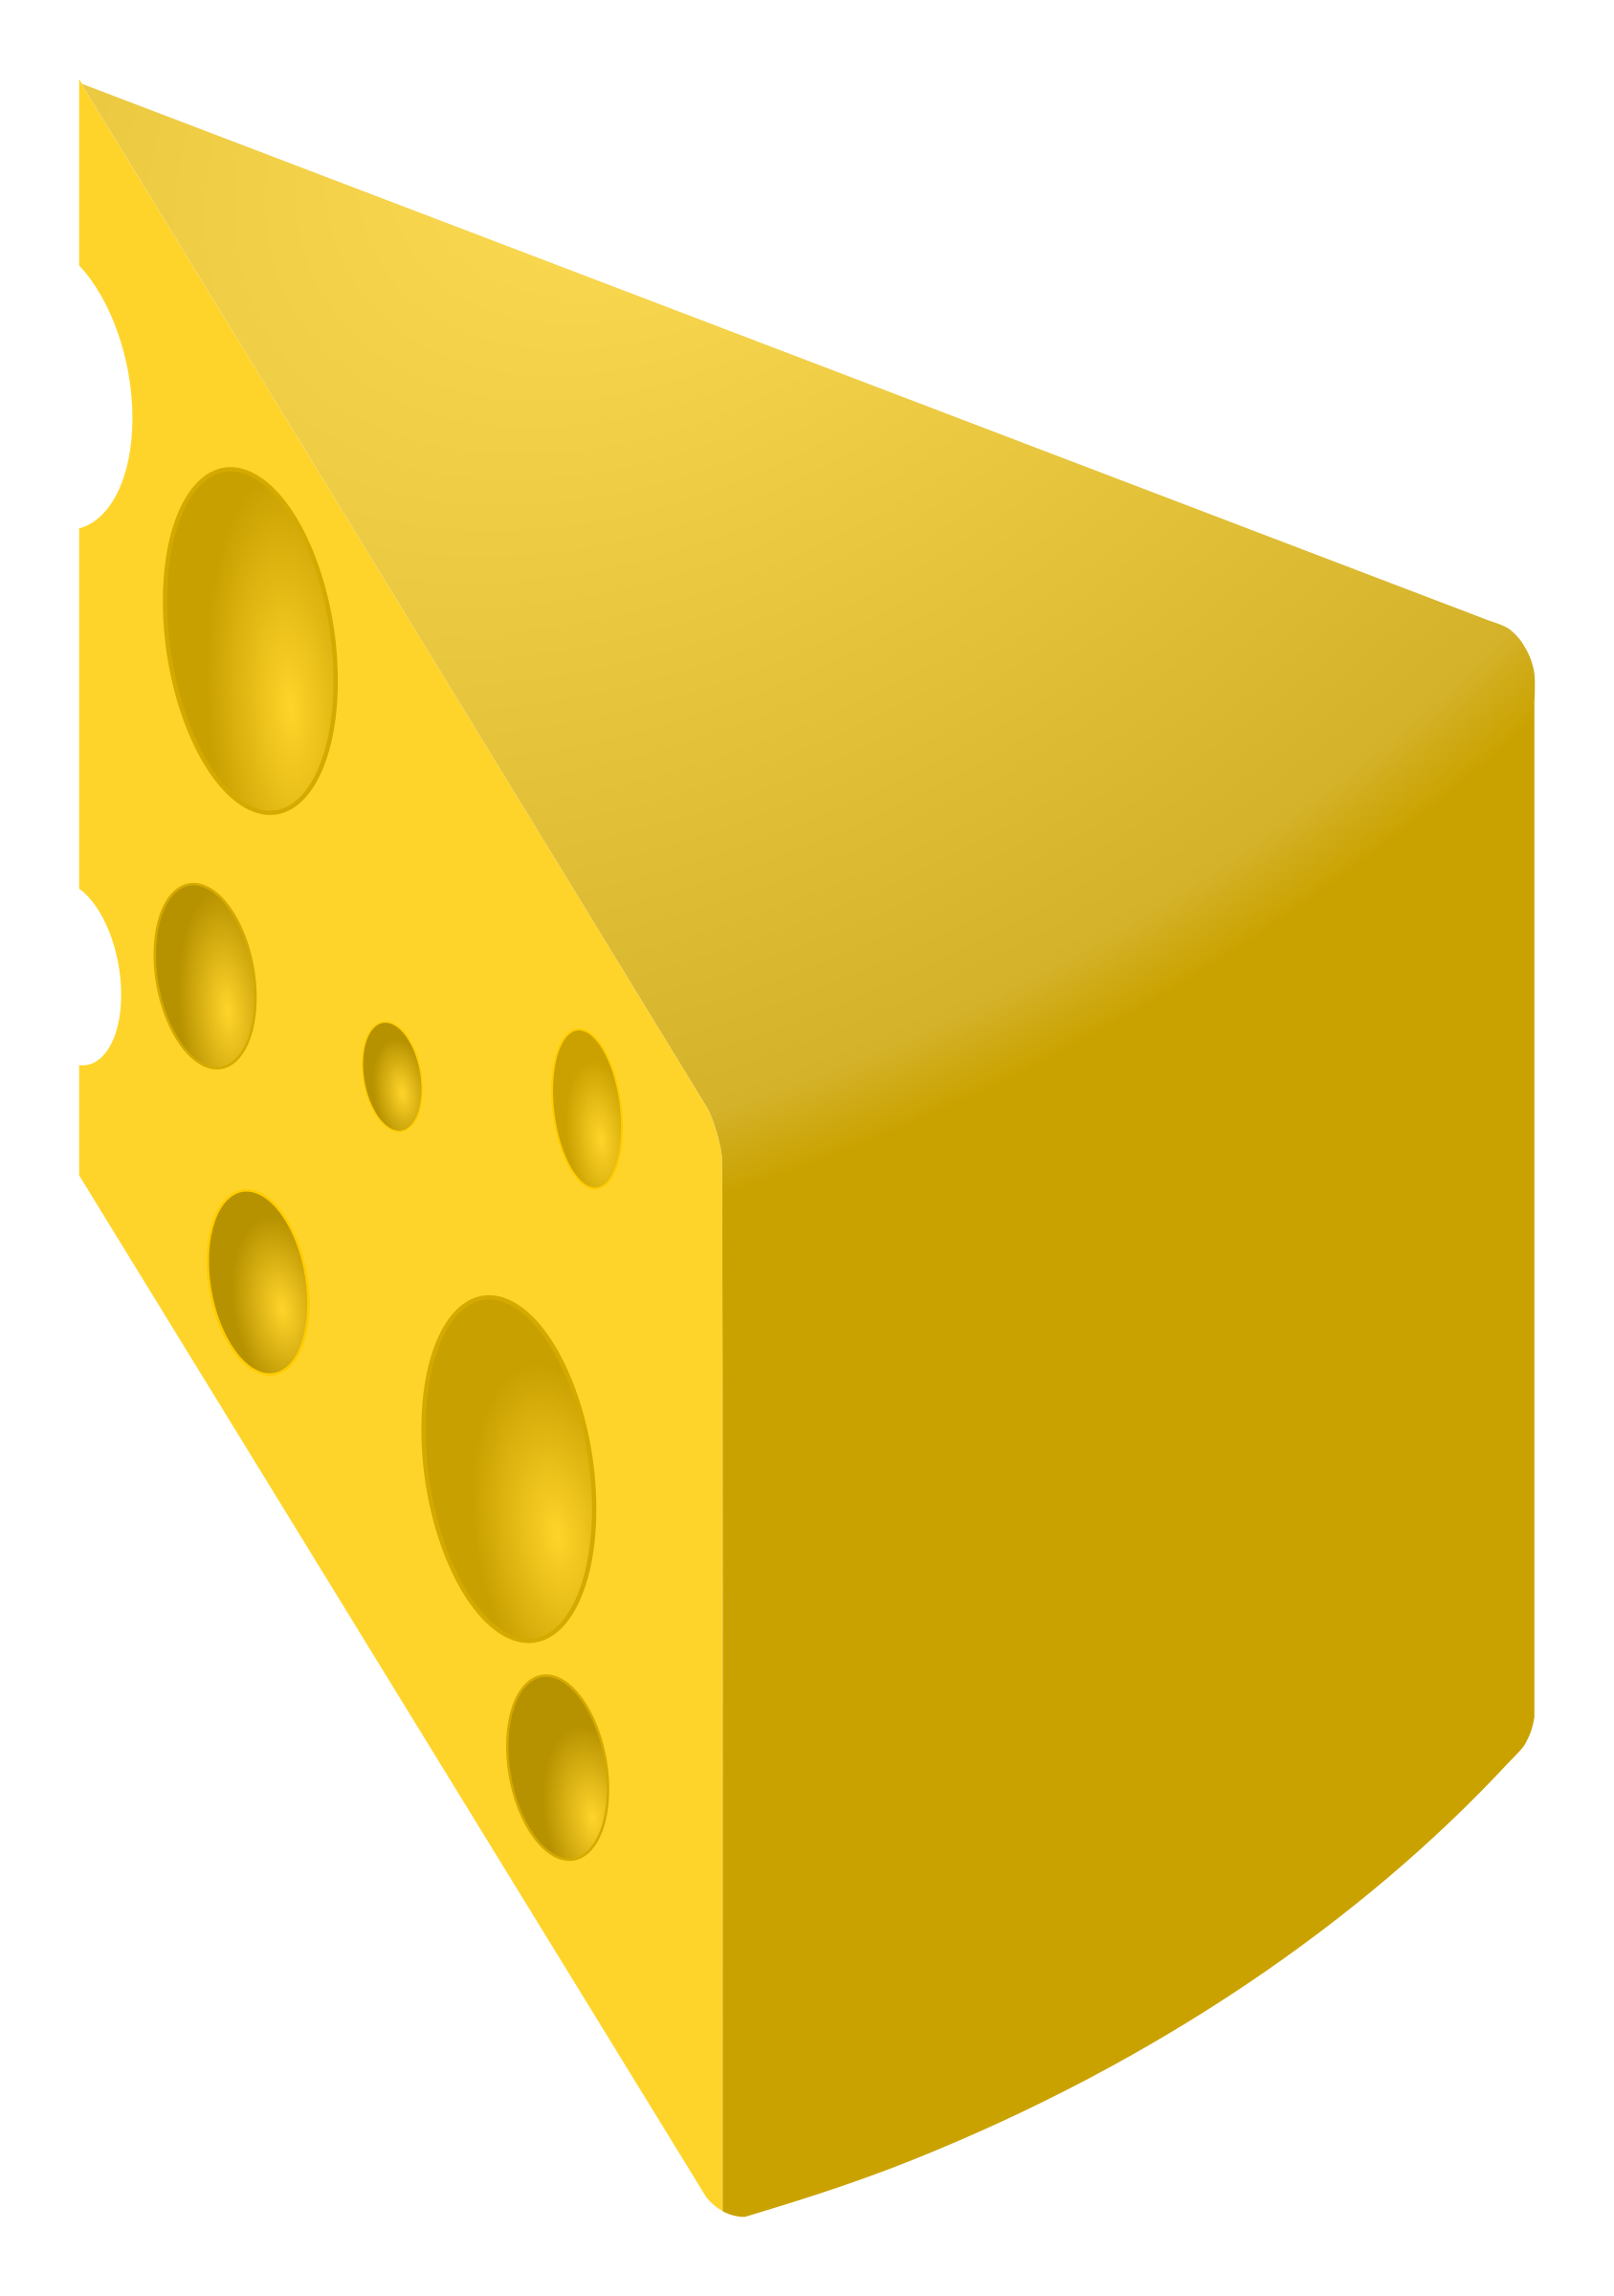 Dairy clipart yello. Cheese png 